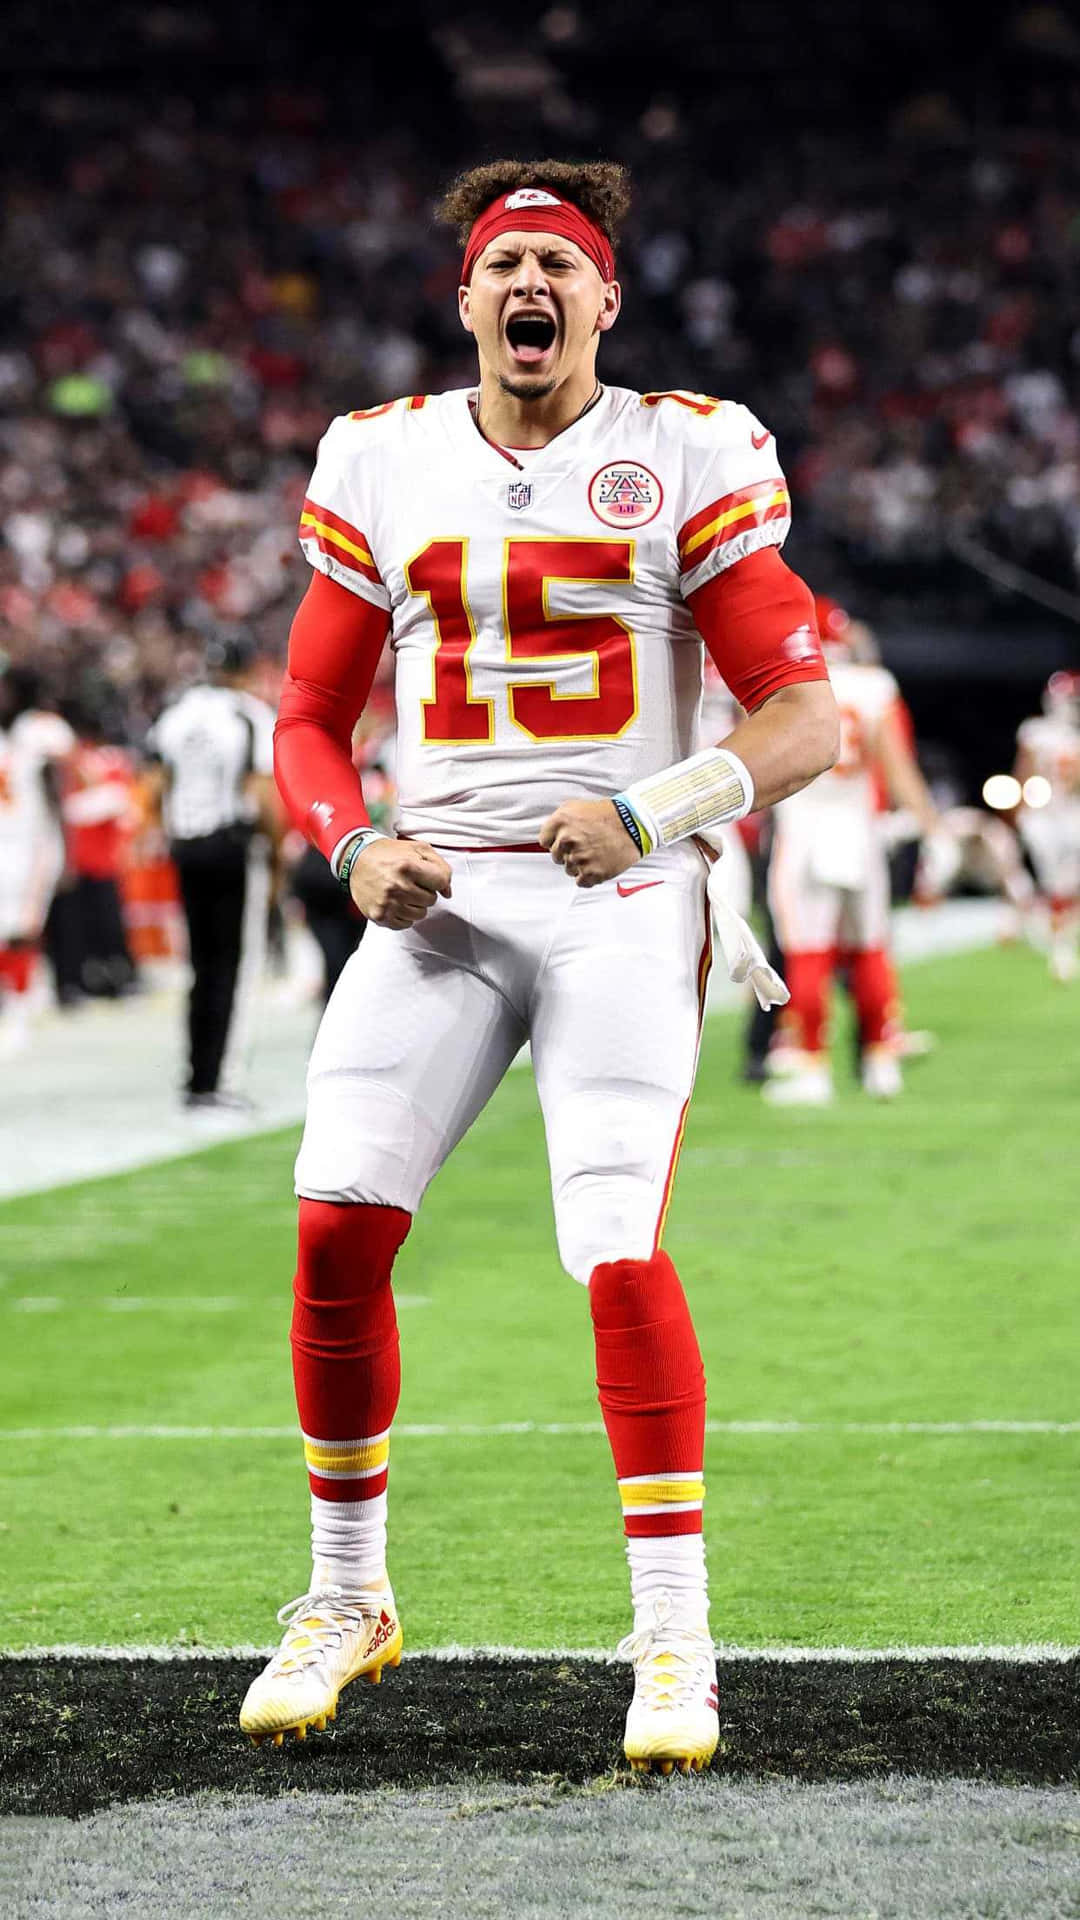 Close-up Action Shot Of Nfl Star, Patrick Mahomes In Game.